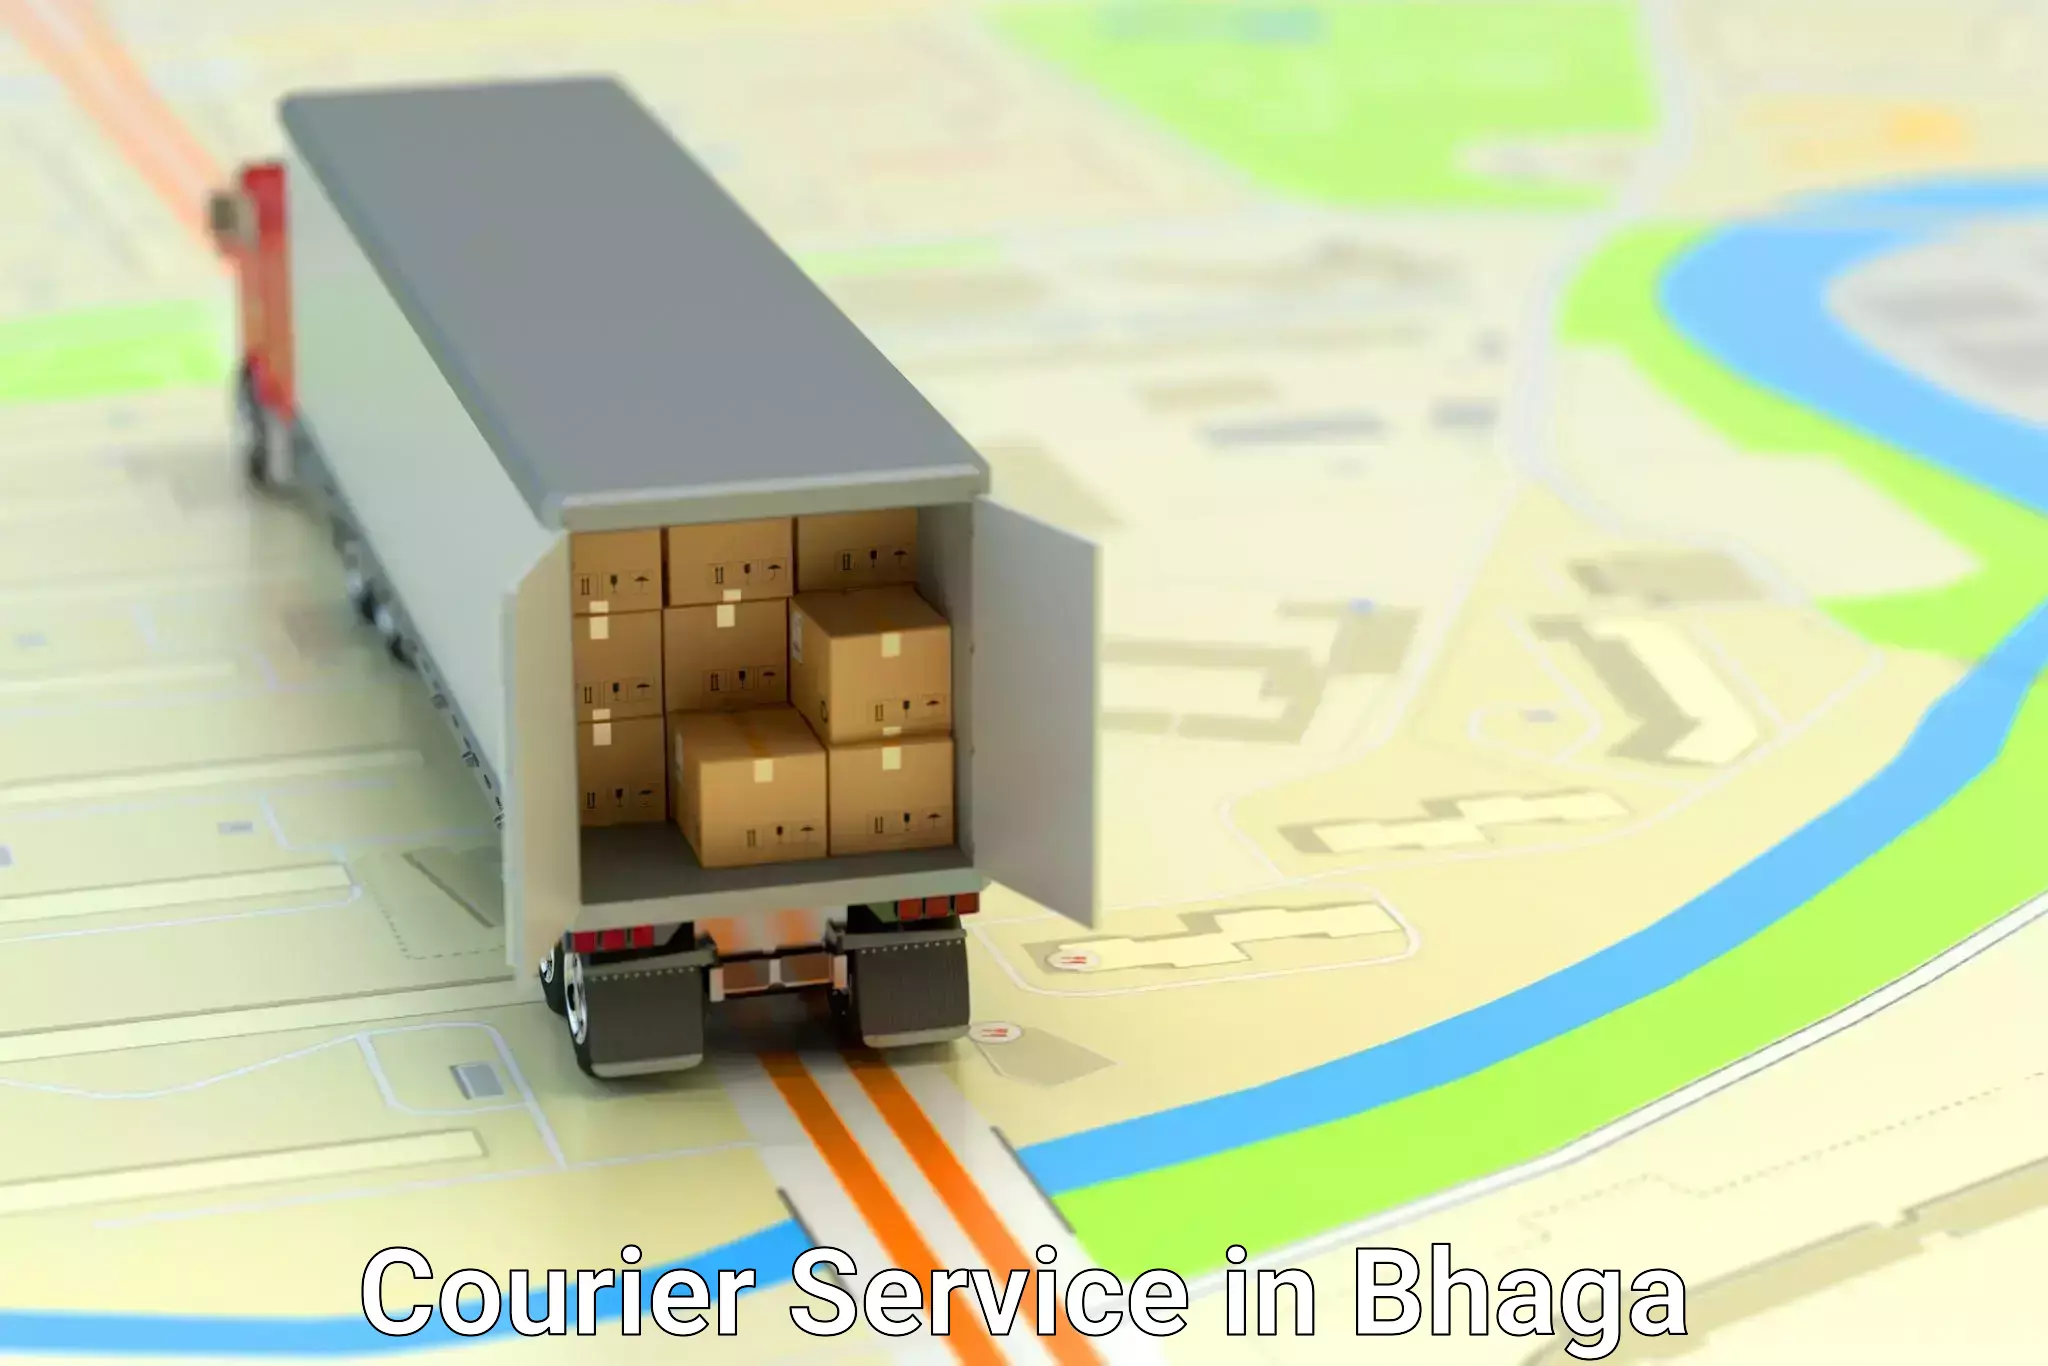 Sustainable courier practices in Bhaga